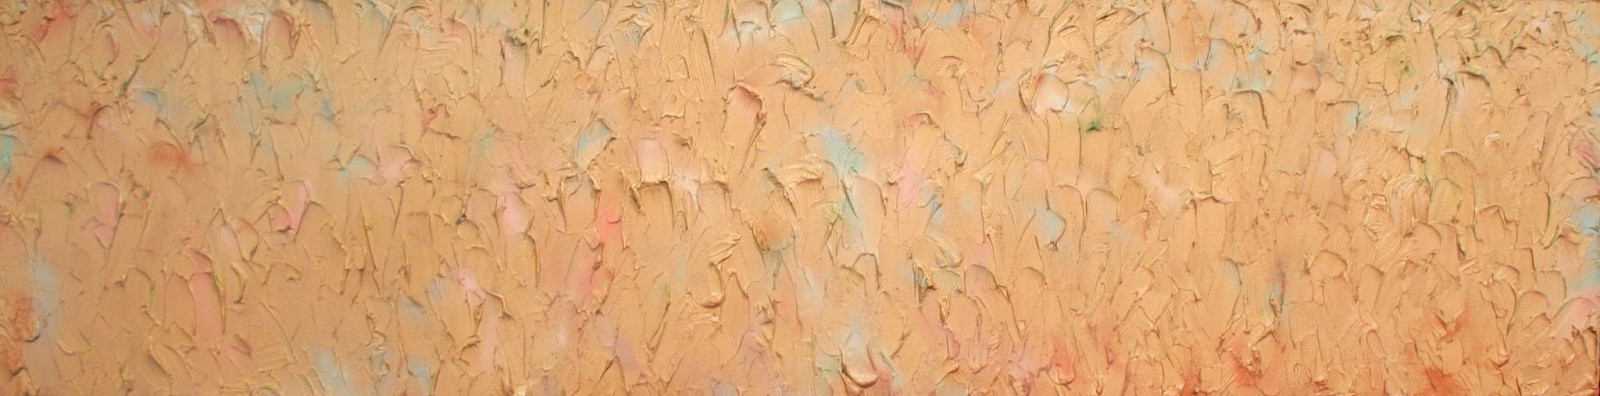 Stanley Boxer (Estate), Curtclusteroffallpassage, 1980
Mixed media on canvas, 17 x 64 in.
BOXE0161